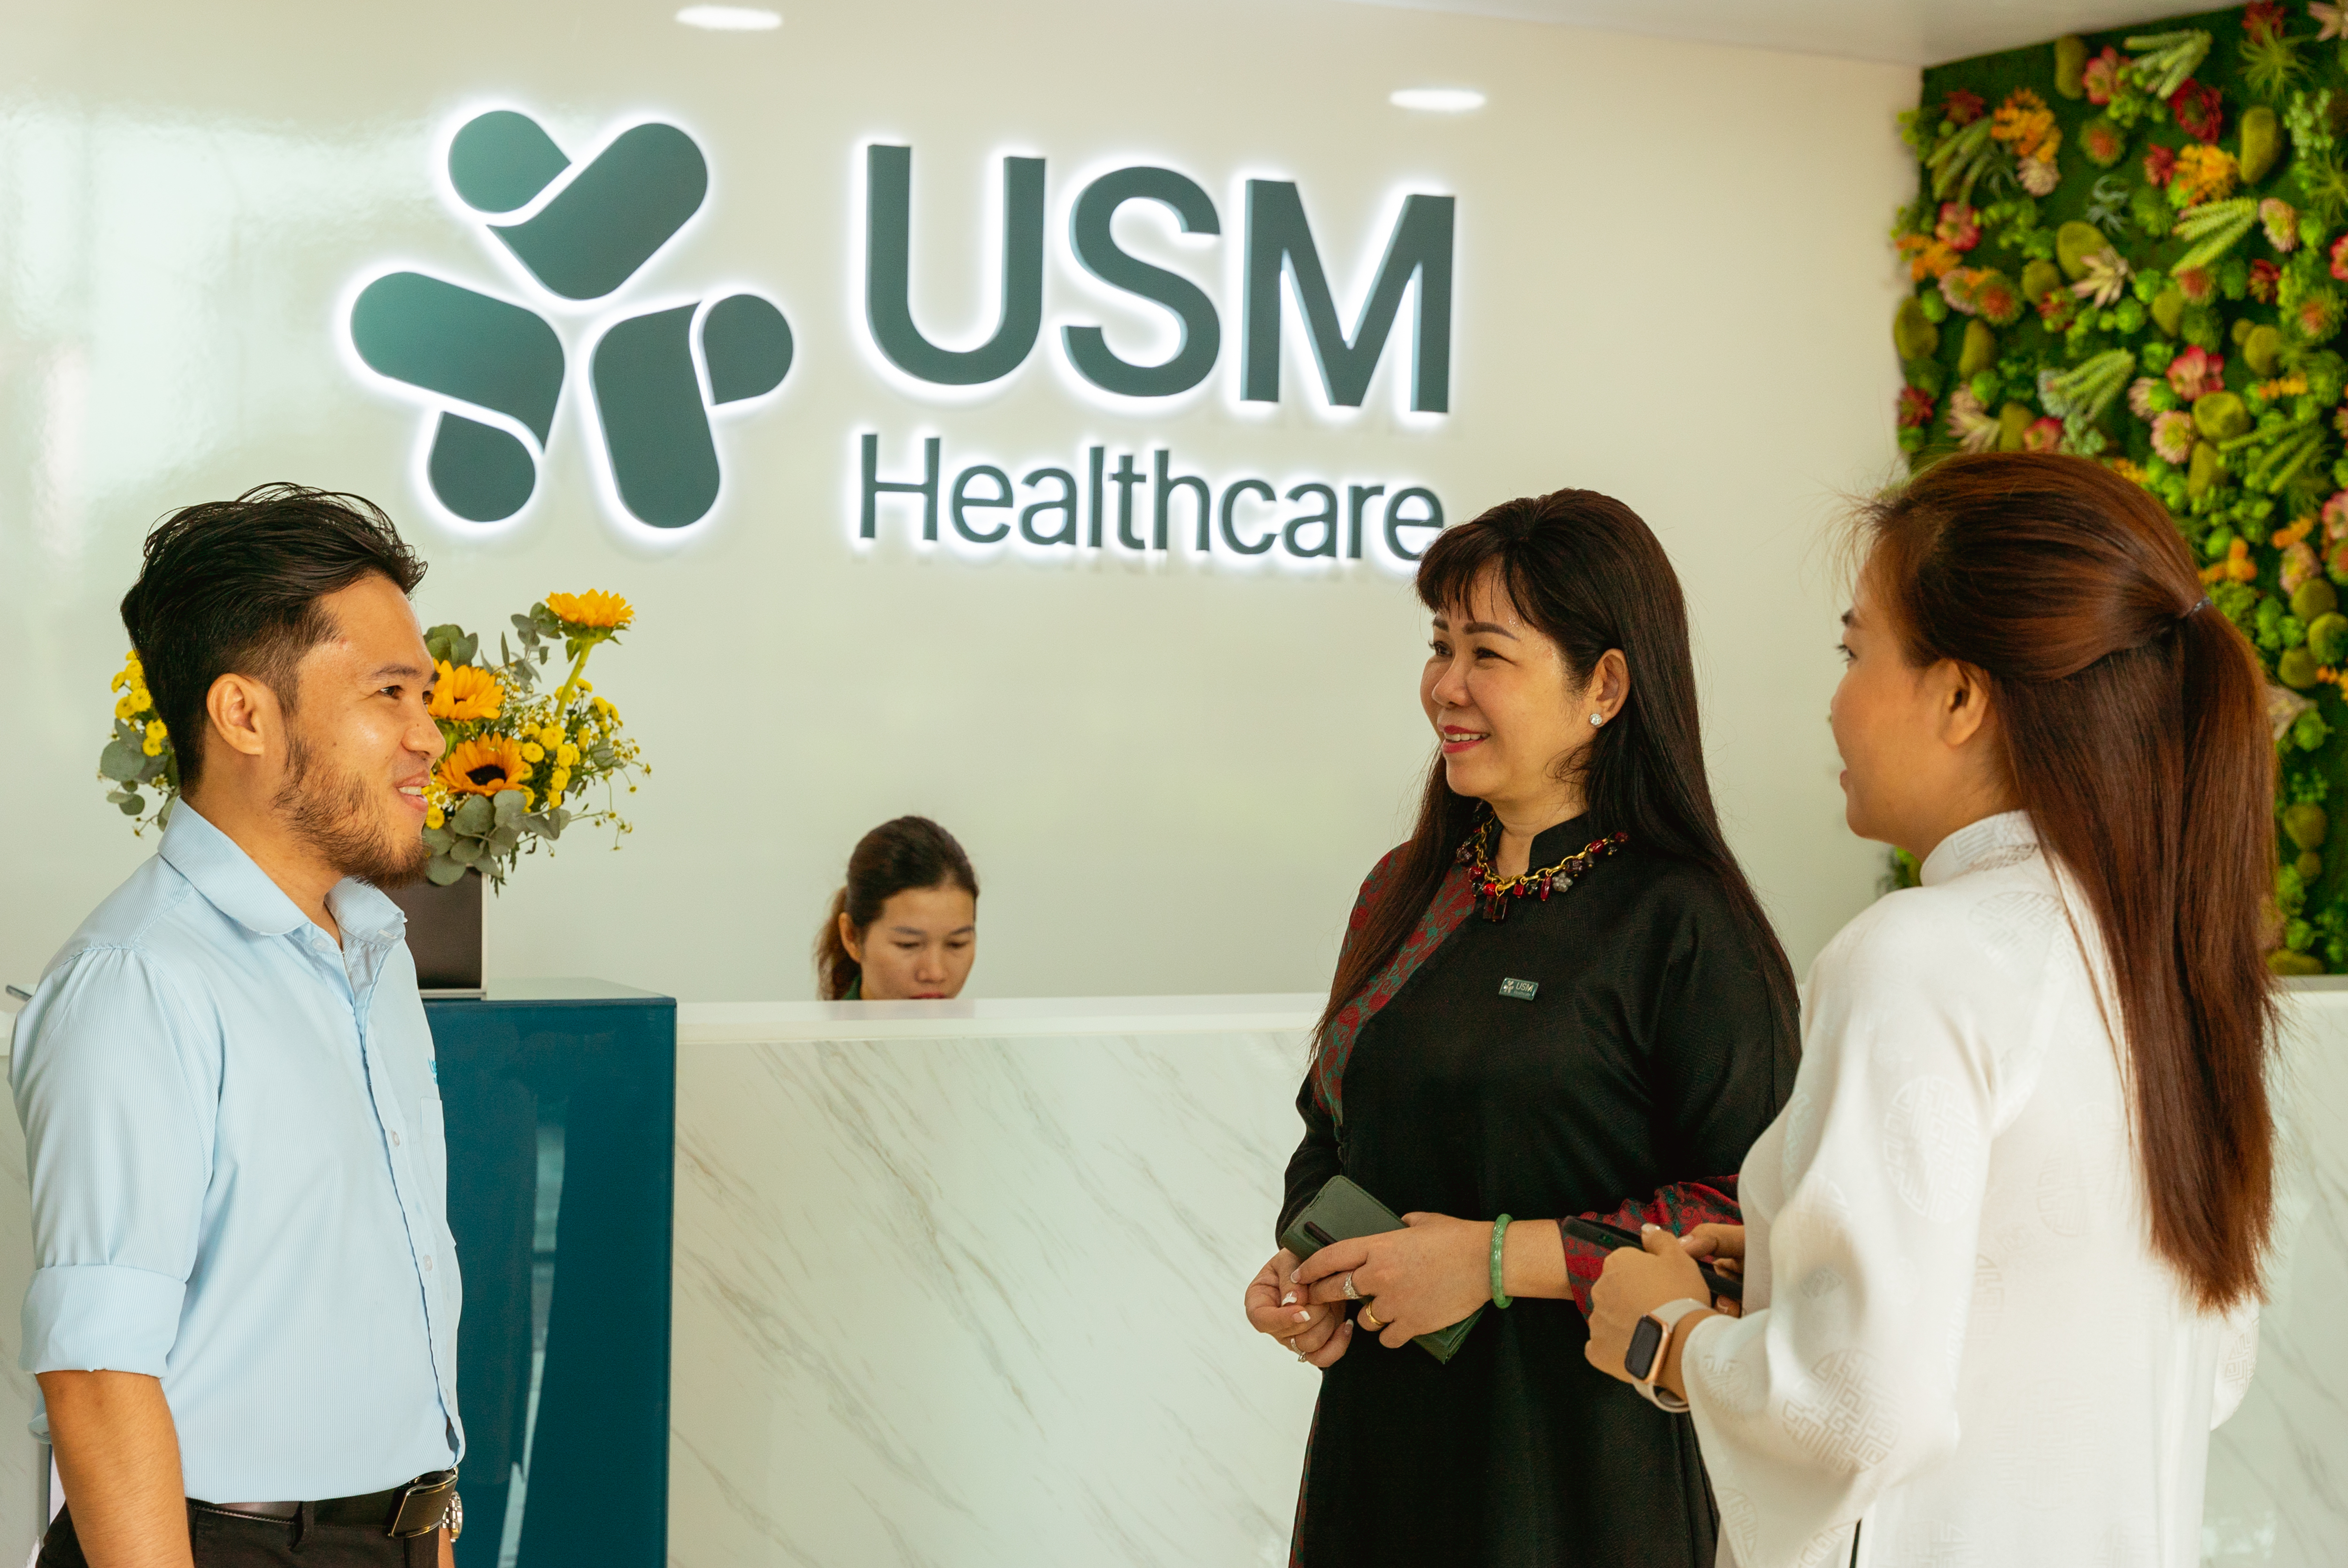 Founder of USM Ms Lam (in black) arrives at USM reception.

20-21 NOV 2023 – HO CHI MINH CITY: Sweef Capital, a women-led investment firm headquartered in Singapore, arranged a photography tour of two promising women-owned and led entrepreneurial businesses in Southeast Asia. Sweef is also supported by UNESCAP. Sweef targets well-run businesses that are set up to deliver social as well as financial value, particularly those run by women and with gender equitable practices. USM, a medical devices manufacturer, and TEKY, an ed-tech company that runs specialist STEAM  programs across Vietnam, are part of Sweef’s investment portfolio and are located in Ho Chi Minh City, Vietnam. The mission involved a factory tour of USM, and time spent with the children benefiting from TEKY’s education workshops.